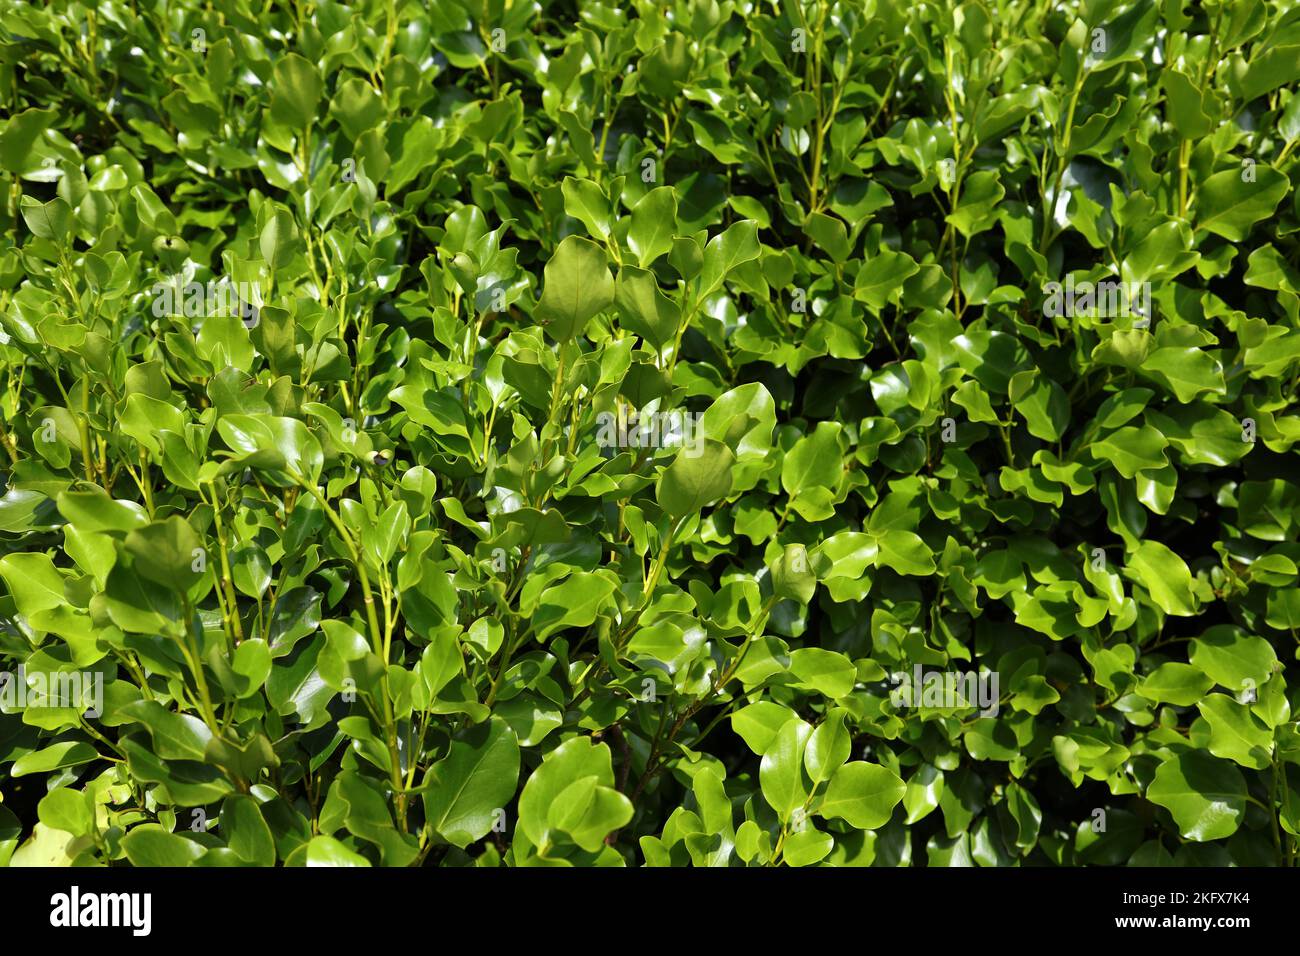 Close-up of Griselinia hedge leaves Stock Photo